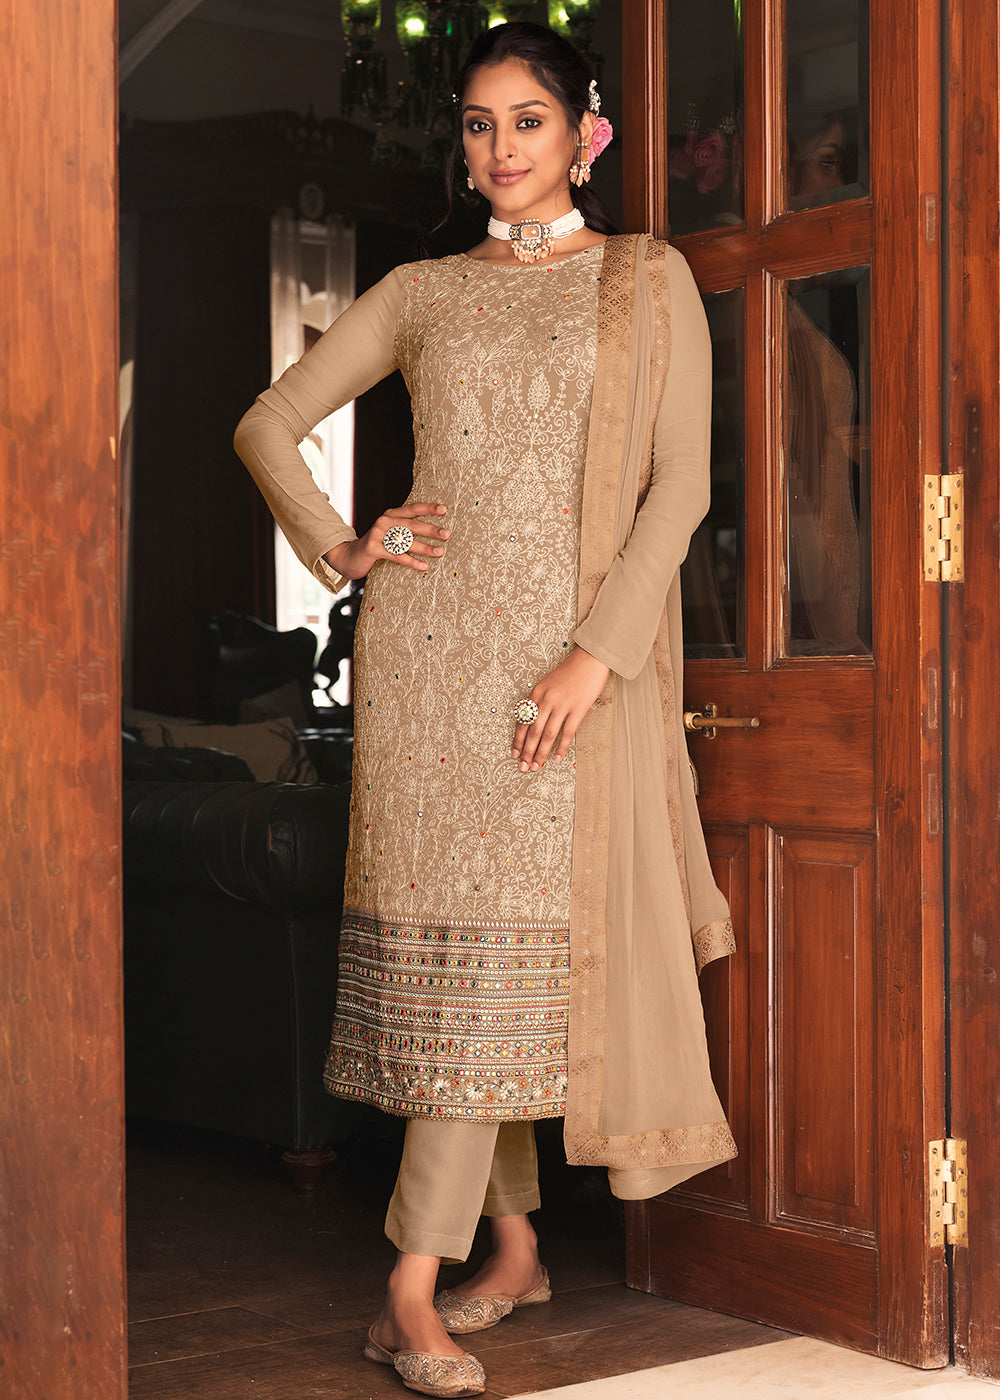 Buy Now Pakistani Style Chikoo Beige Function Wear Salwar Suit Online in Canada at Empress Clothing.